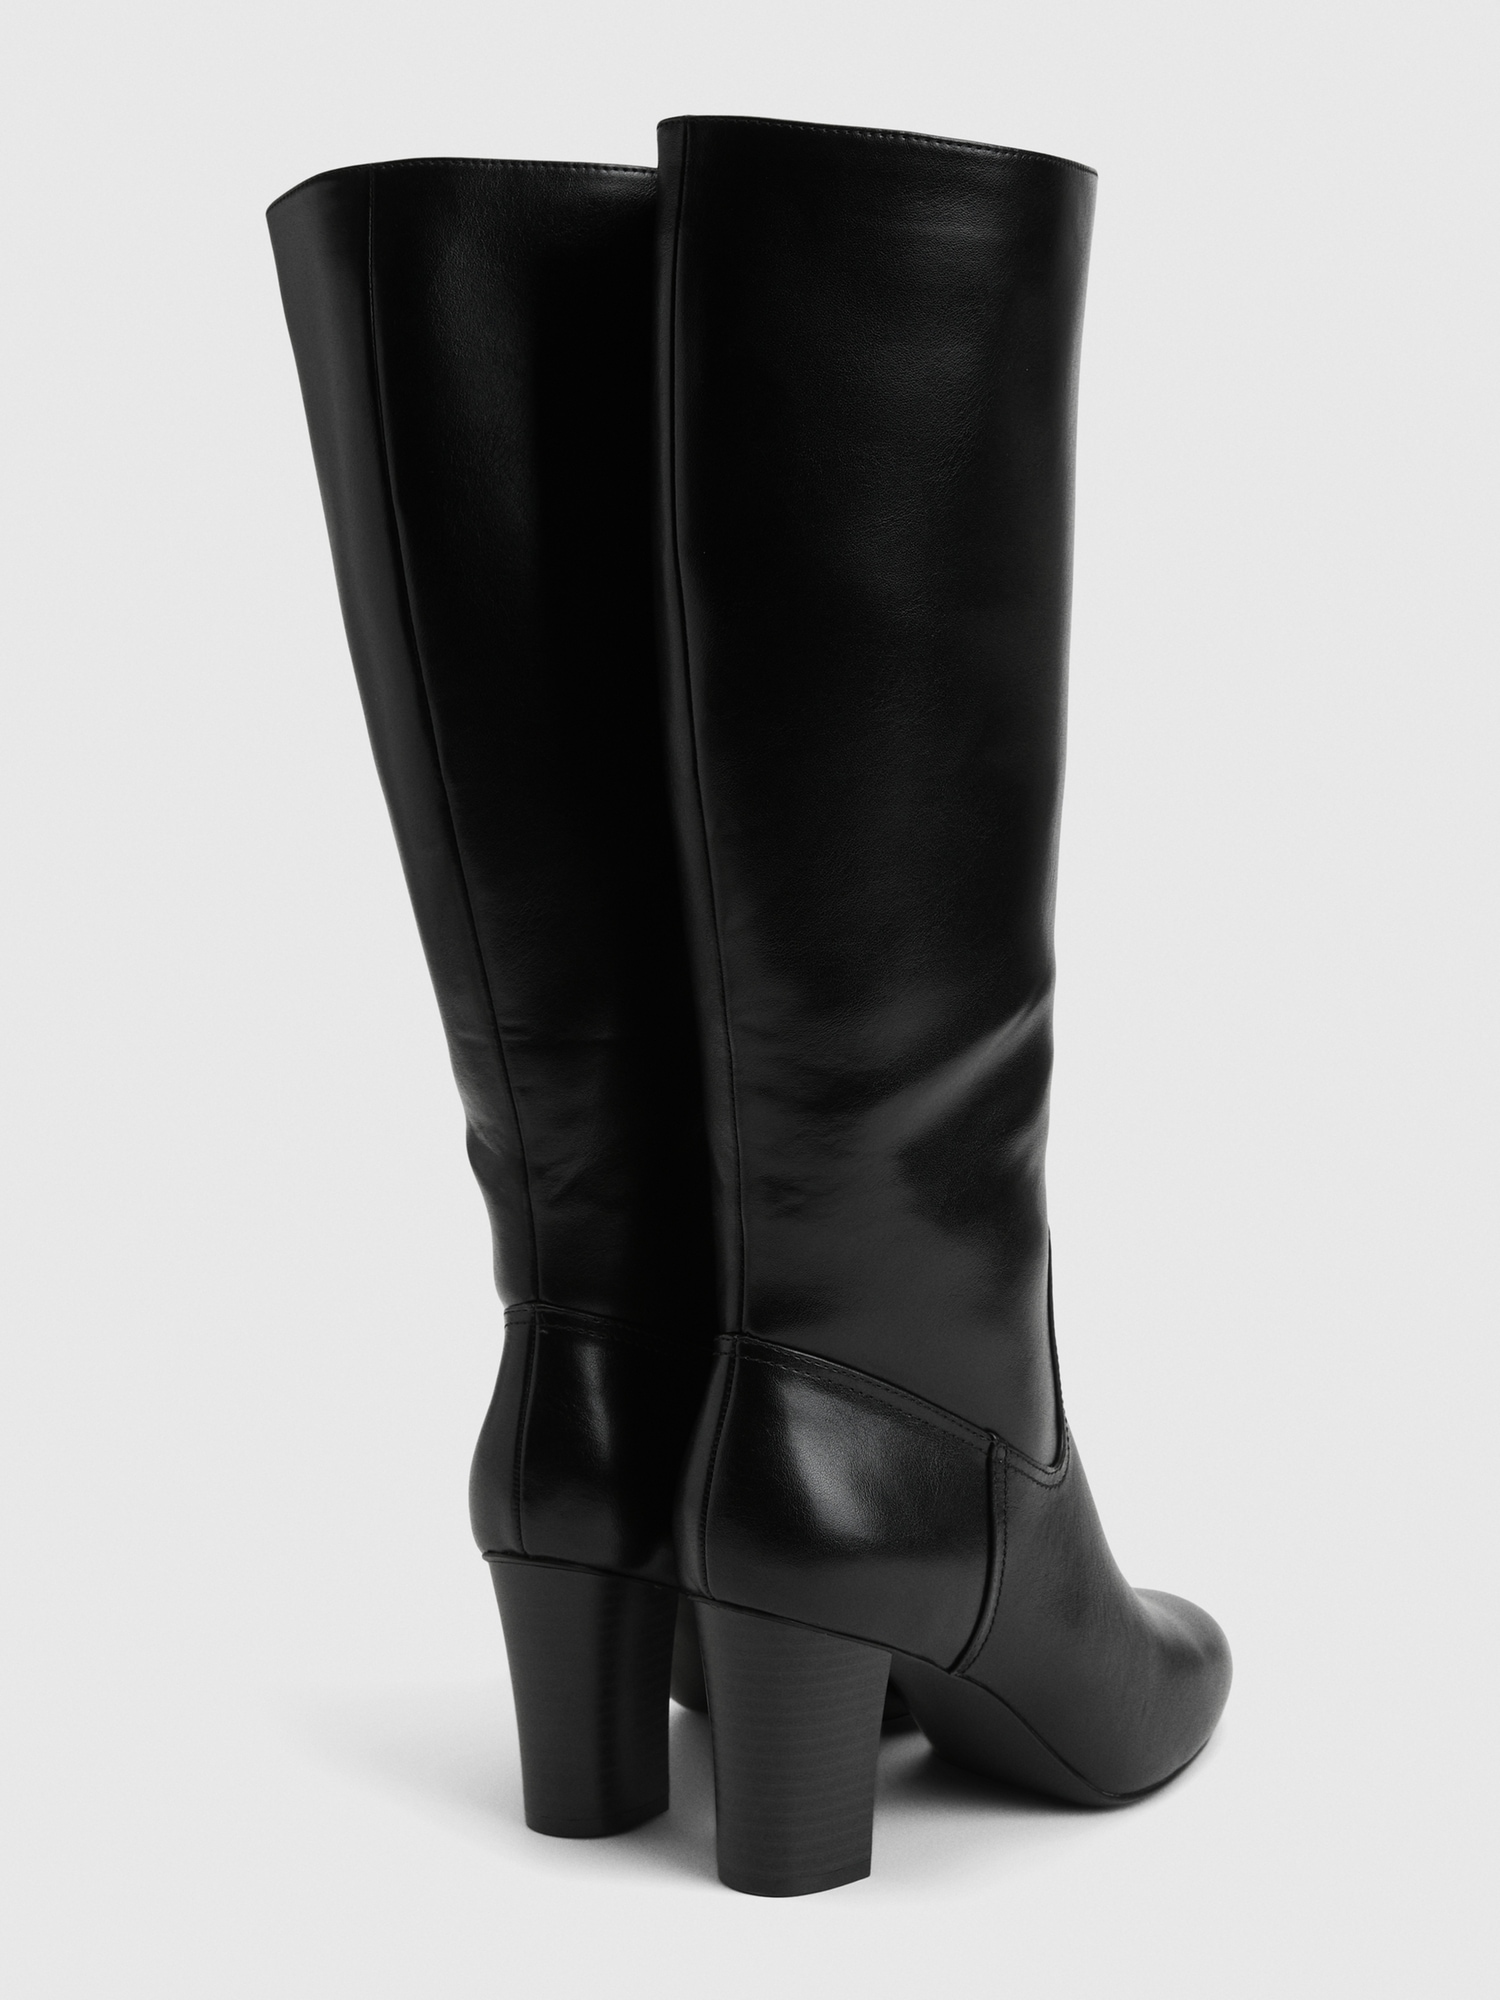 Tall Stacked Heel Boots | Gap